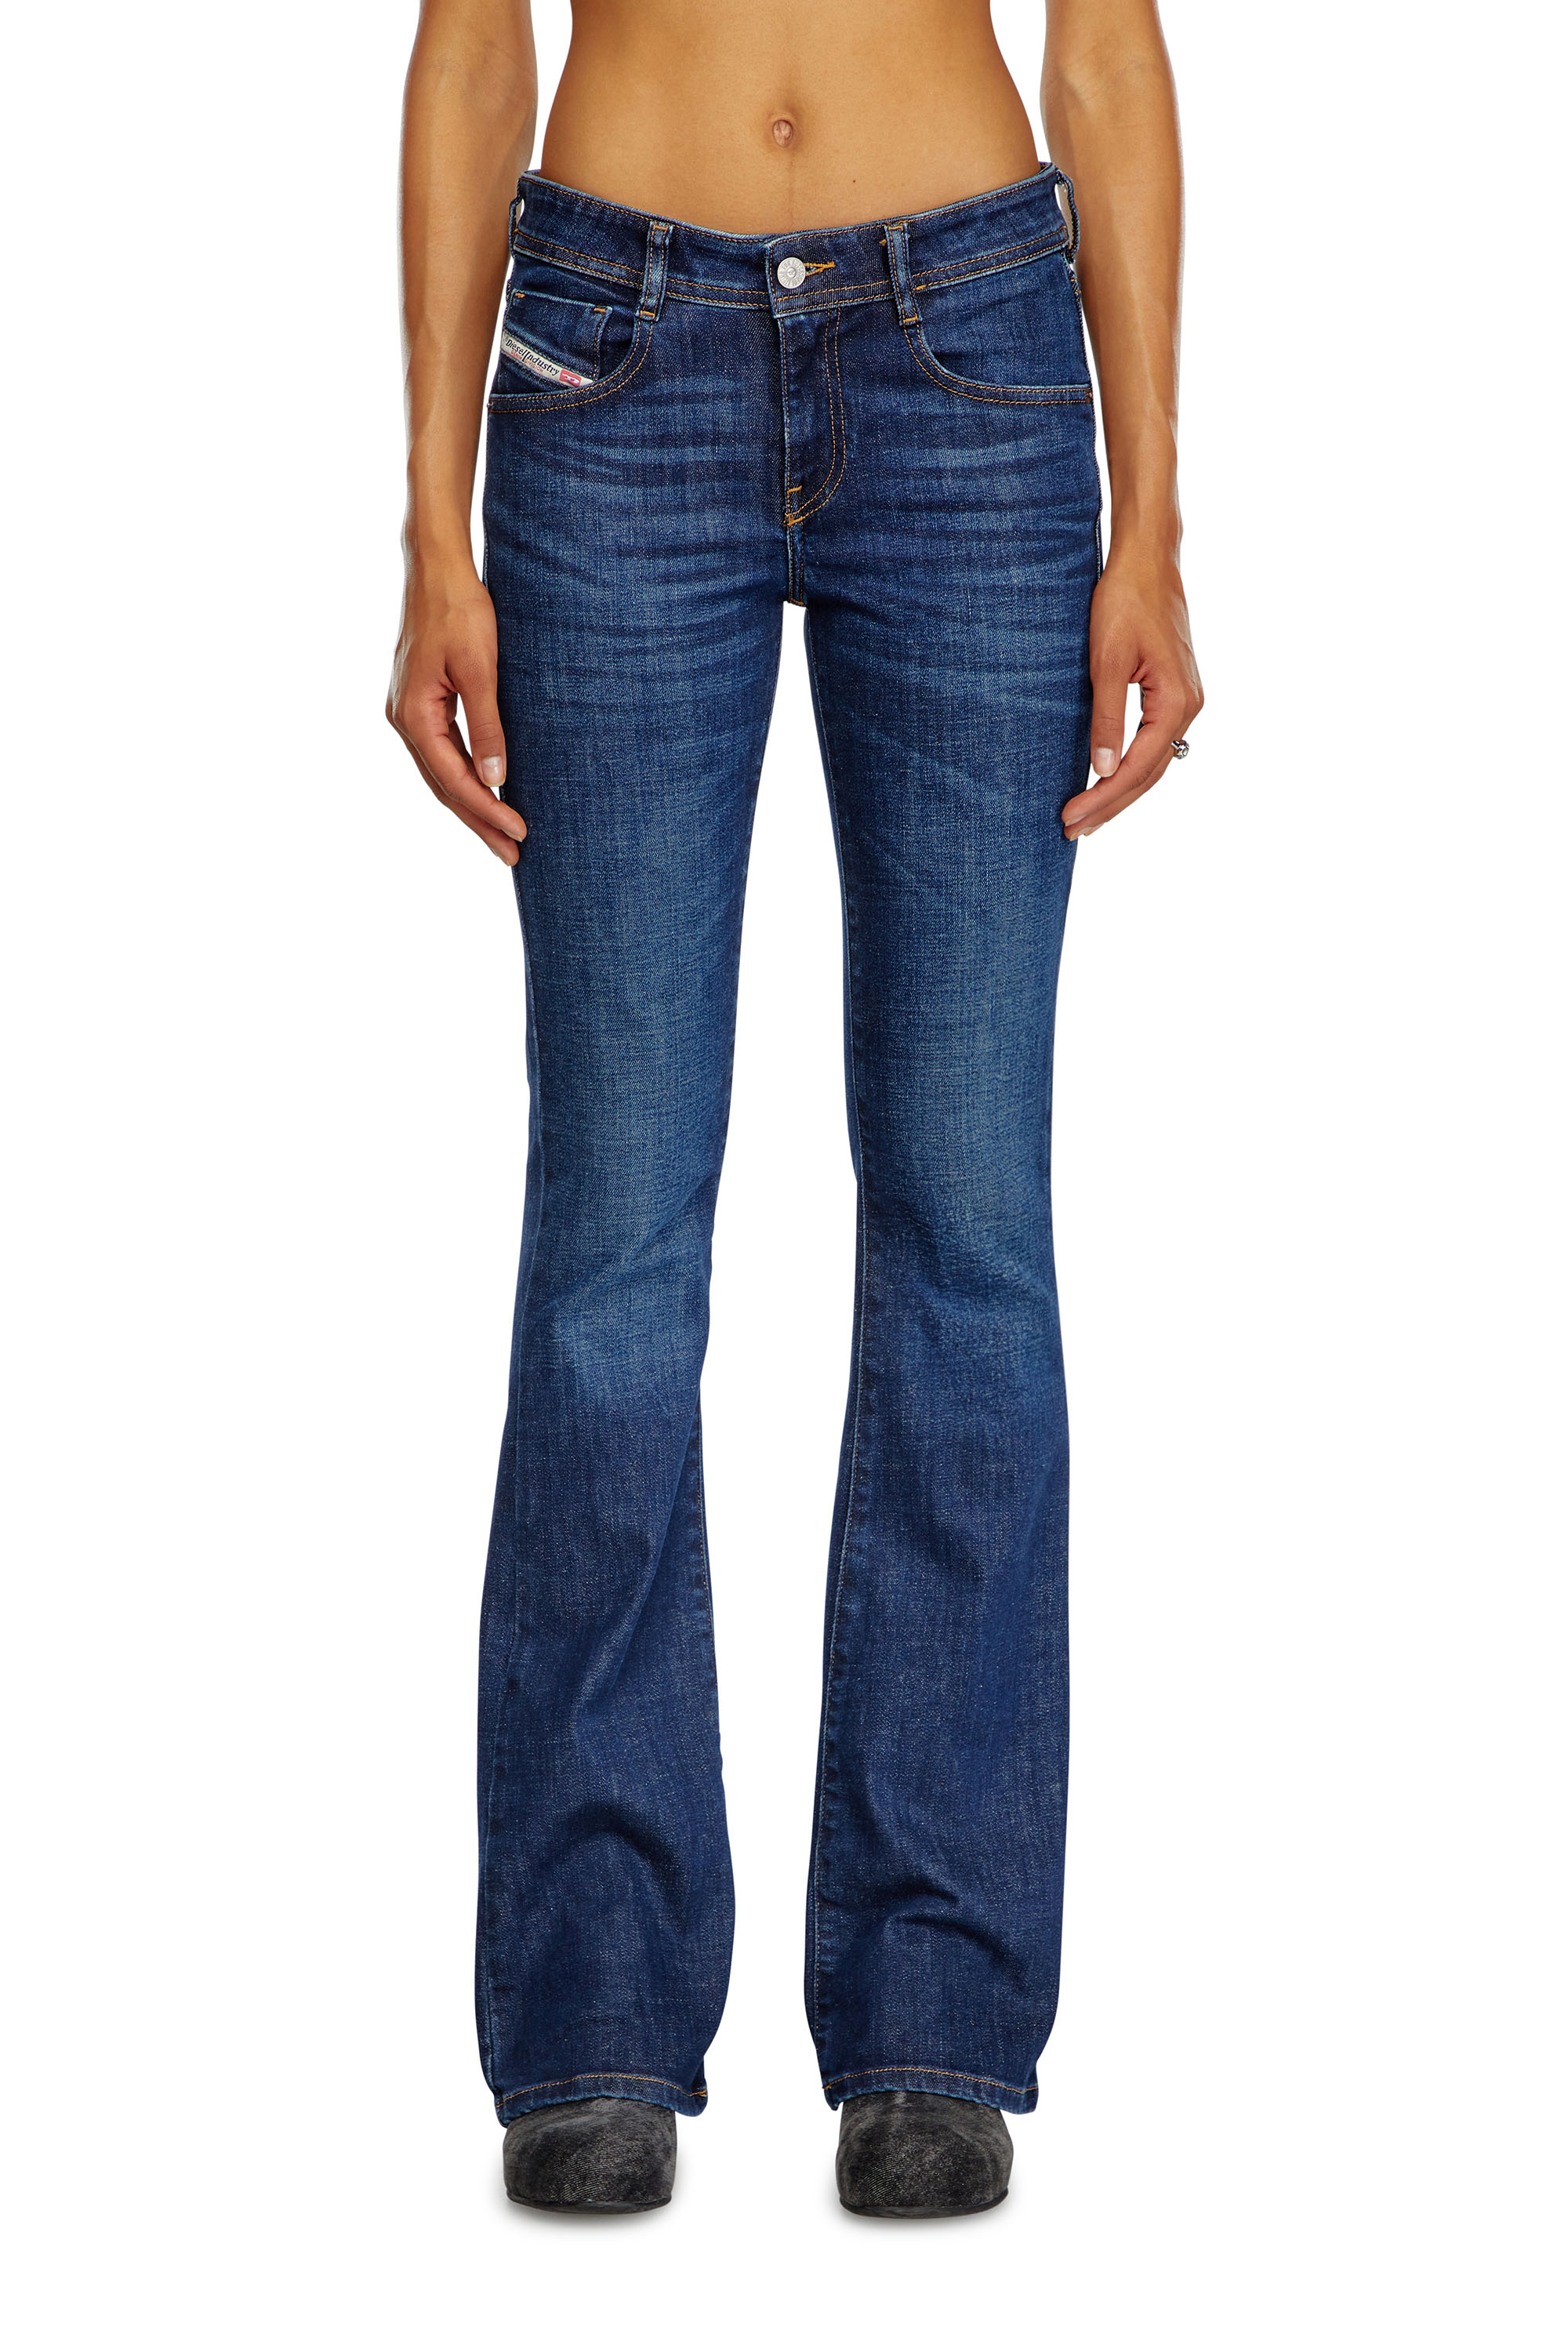 Bootcut and Flare Jeans 1969 D-Ebbey 09B90, Azul Oscuro - Vaqueros